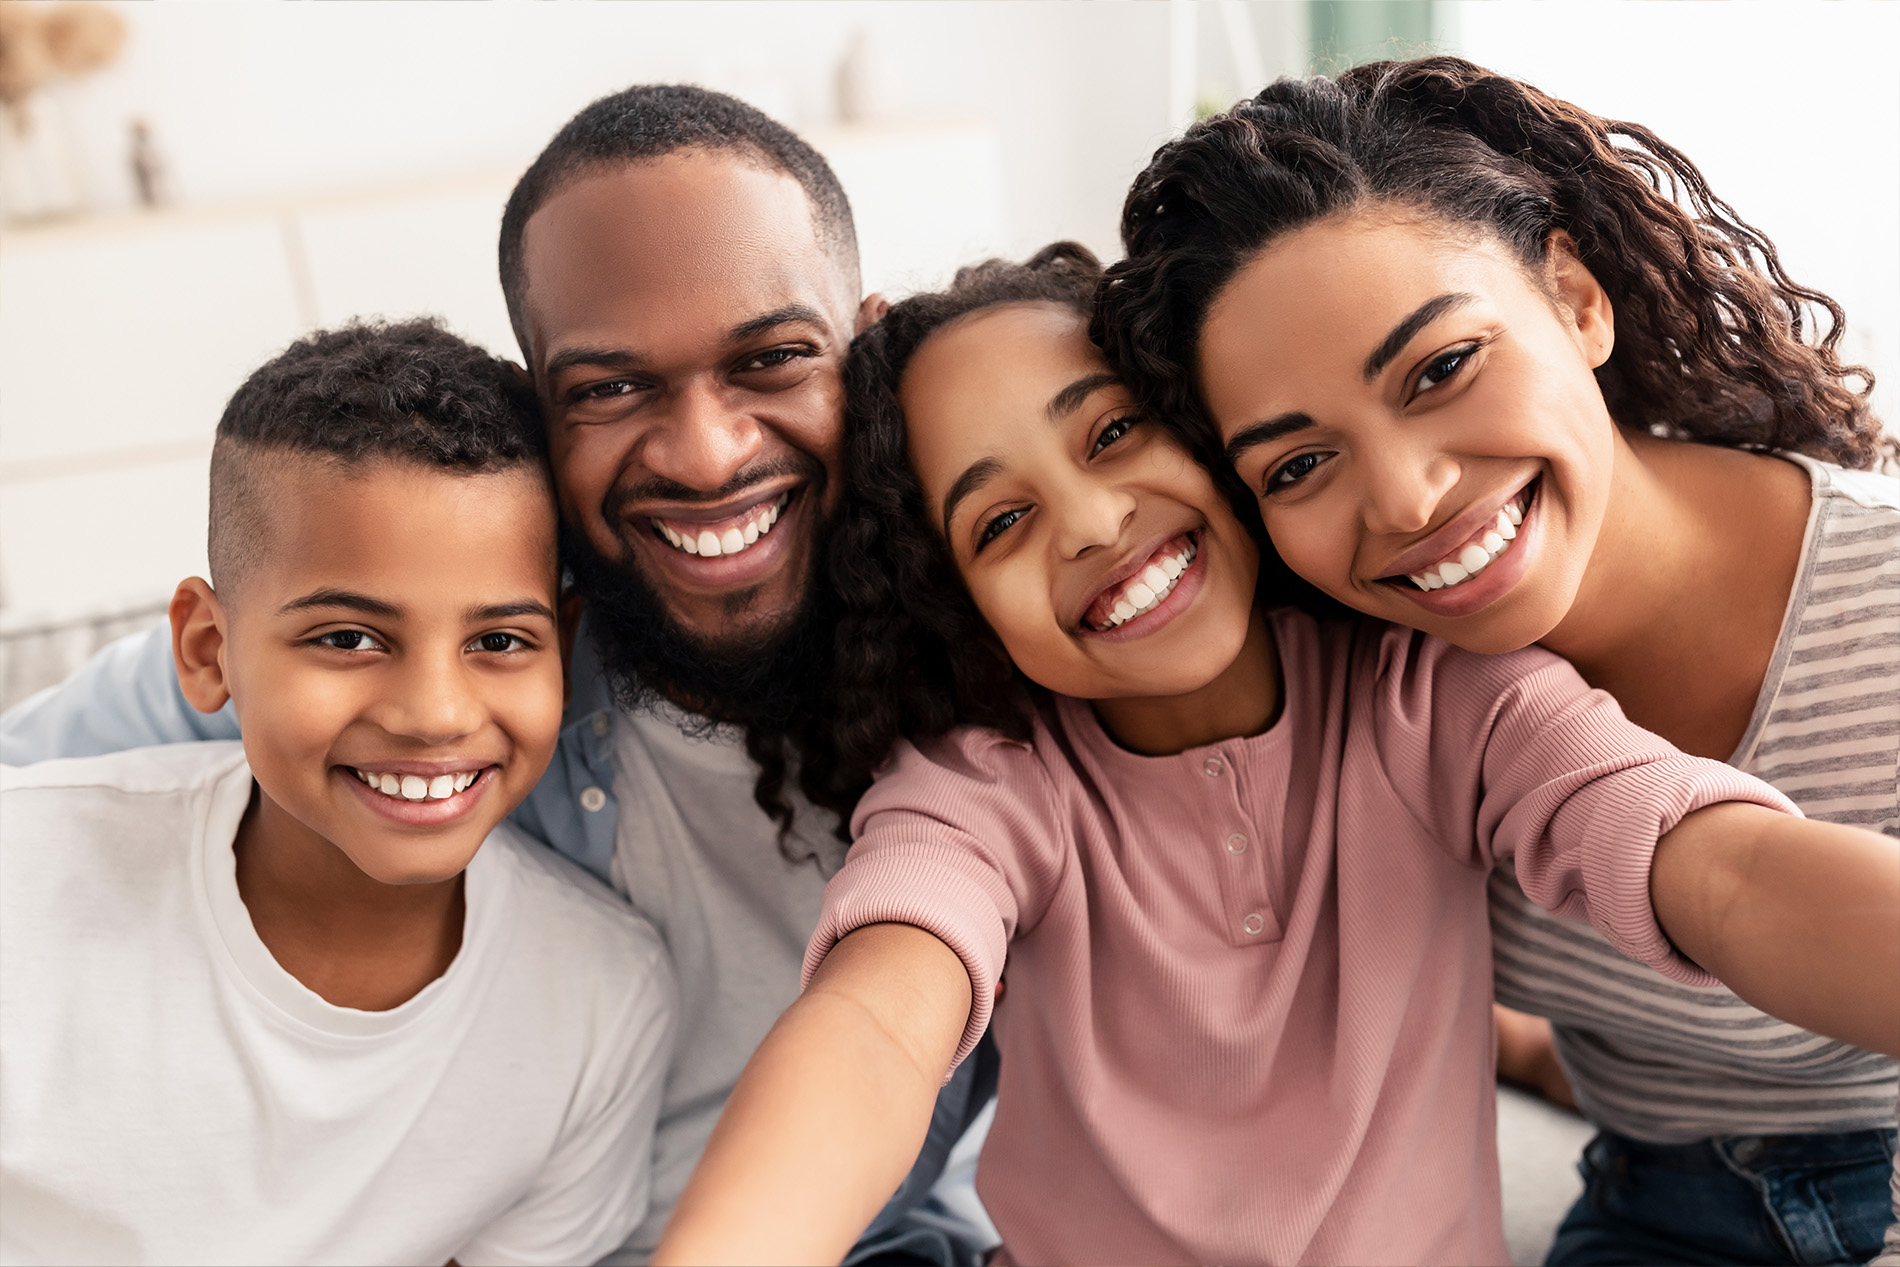 Hagerstown Family Dental | Ceramic Crowns, Oral Exams and Dentures